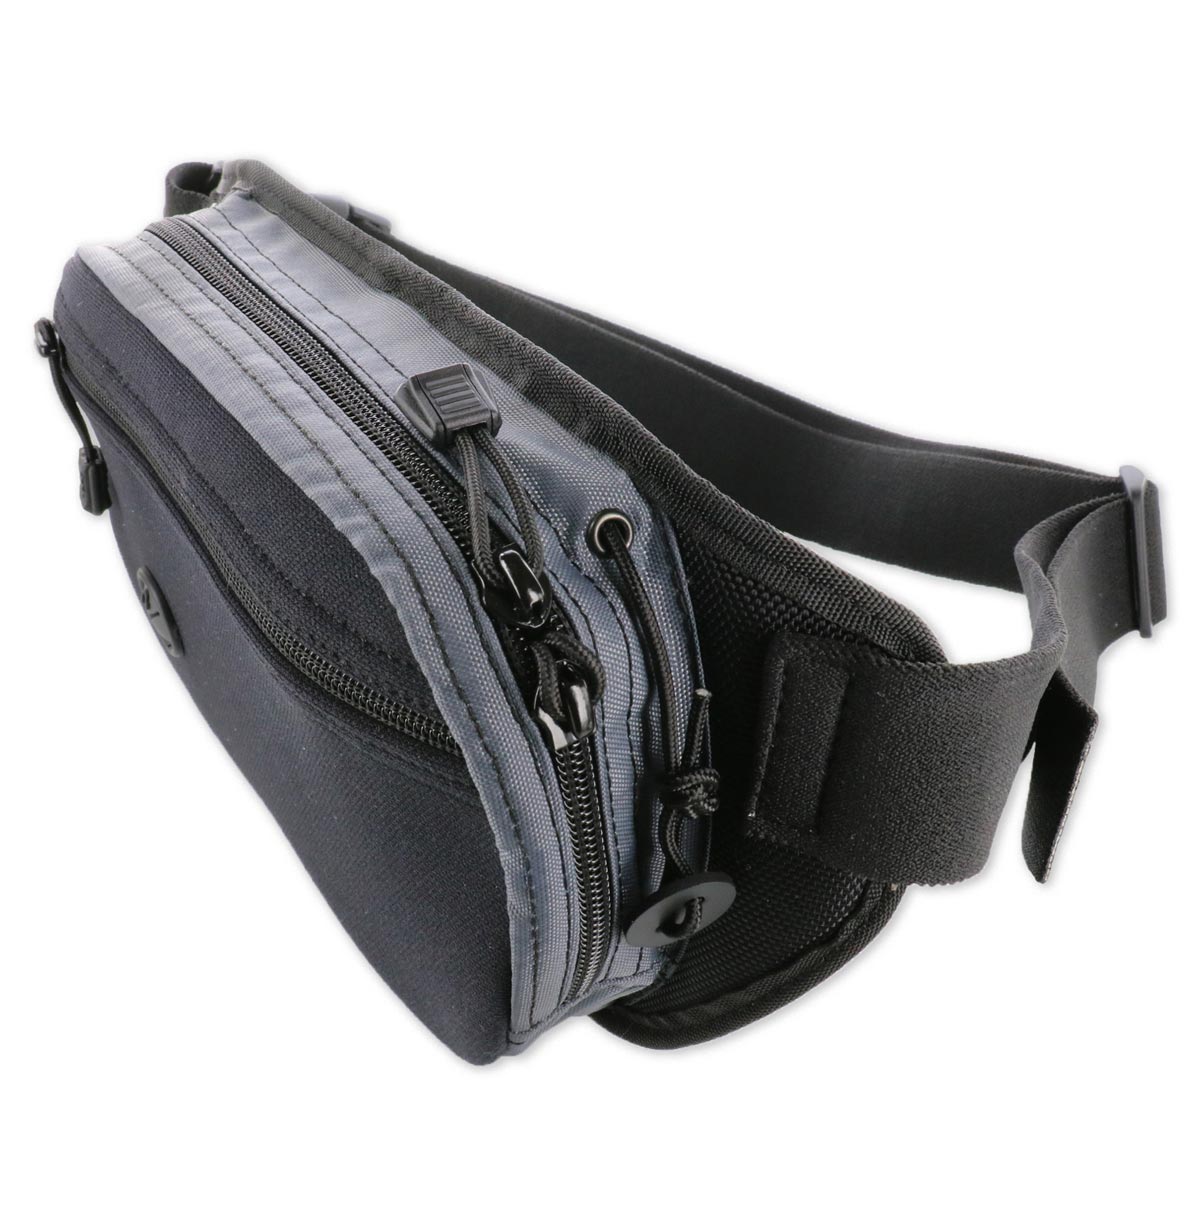 Galco Fastrax Pac Waistpack (COMPACT)